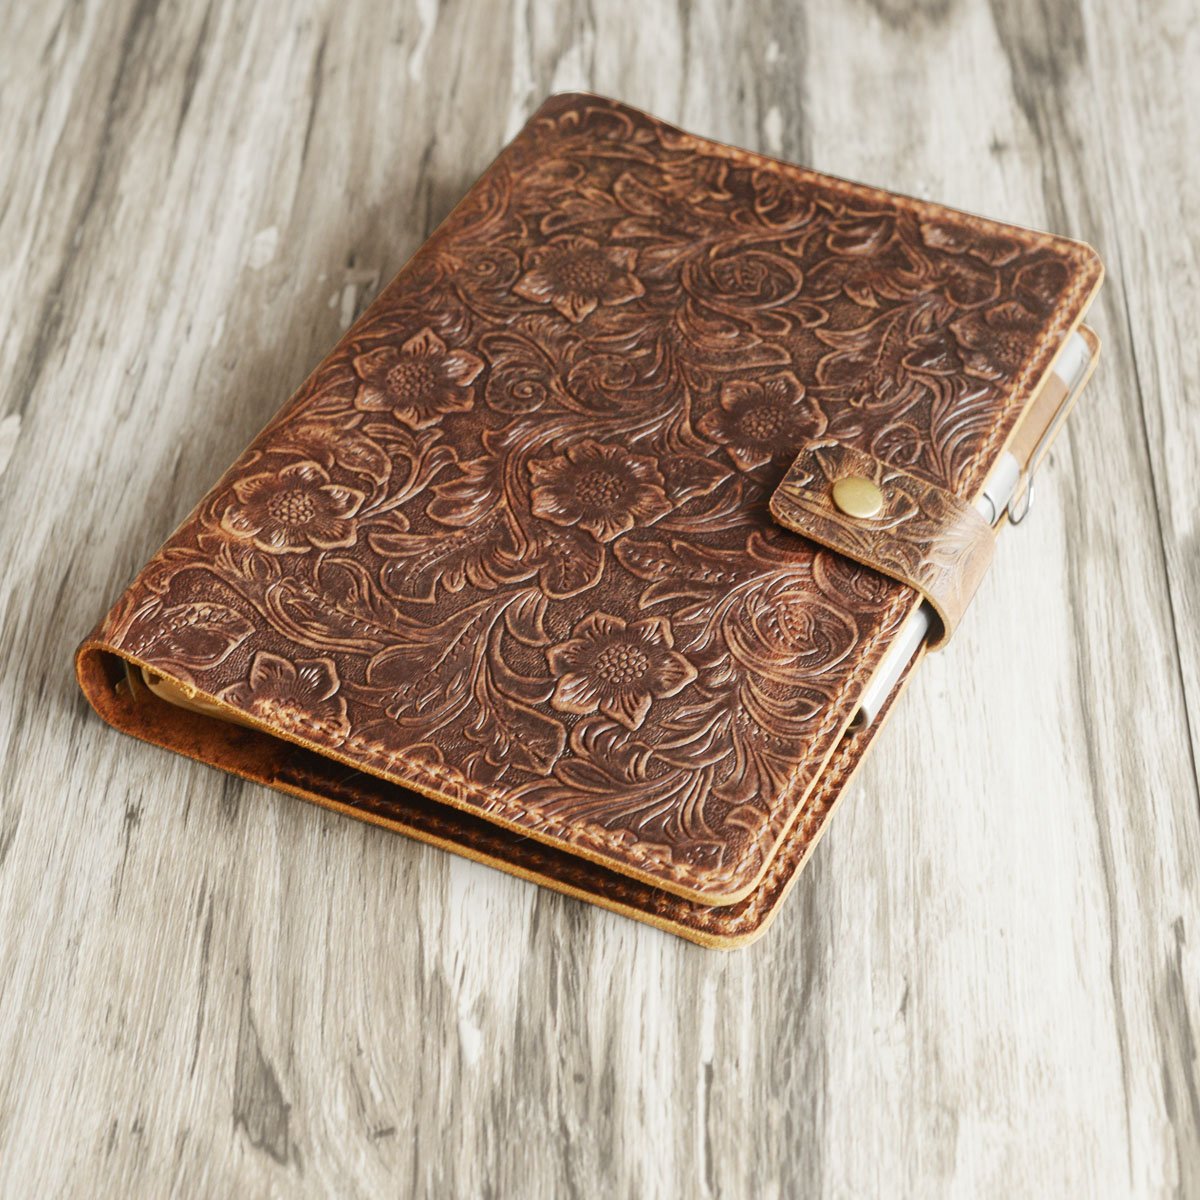 Distressed Tooled Leather 6 Ring Binder Leather Journals - Leather